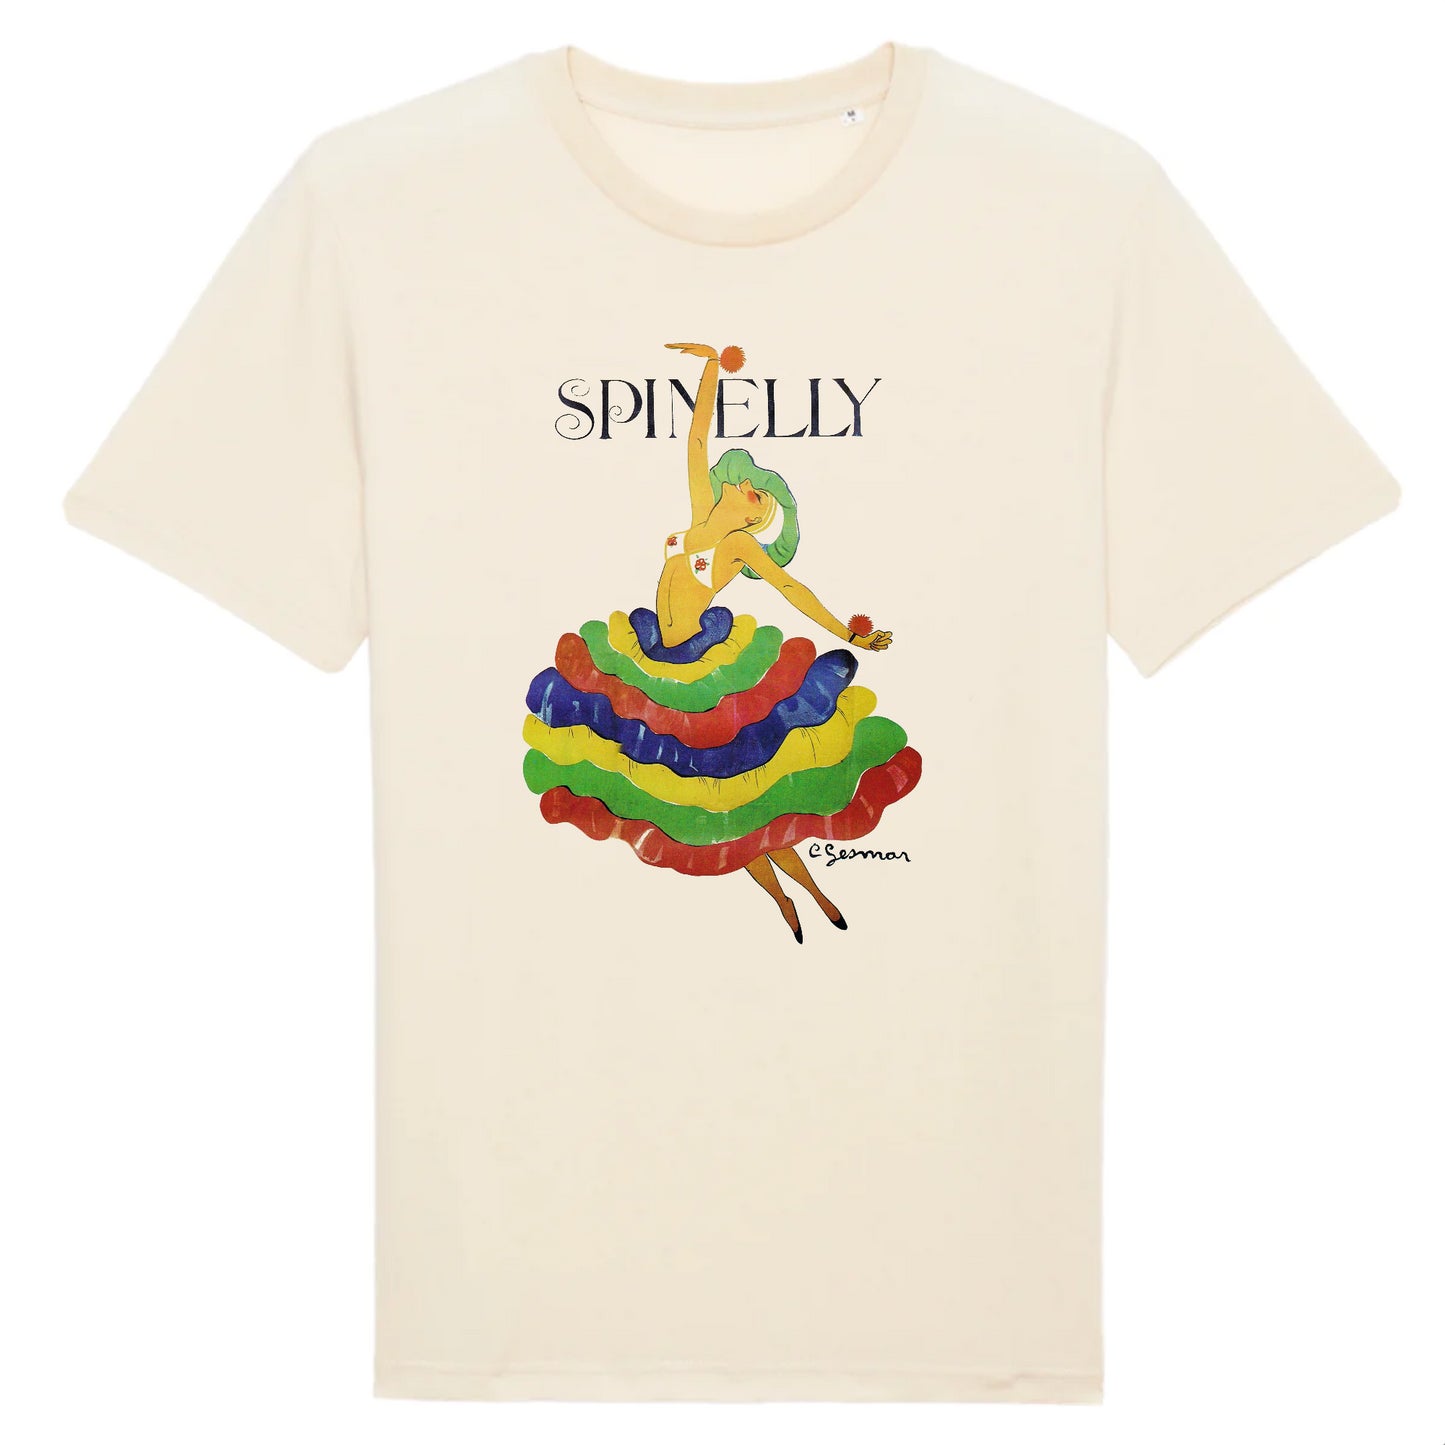 Spinelly by Charles Gesmar, 1919 - Organic Cotton T-Shirt